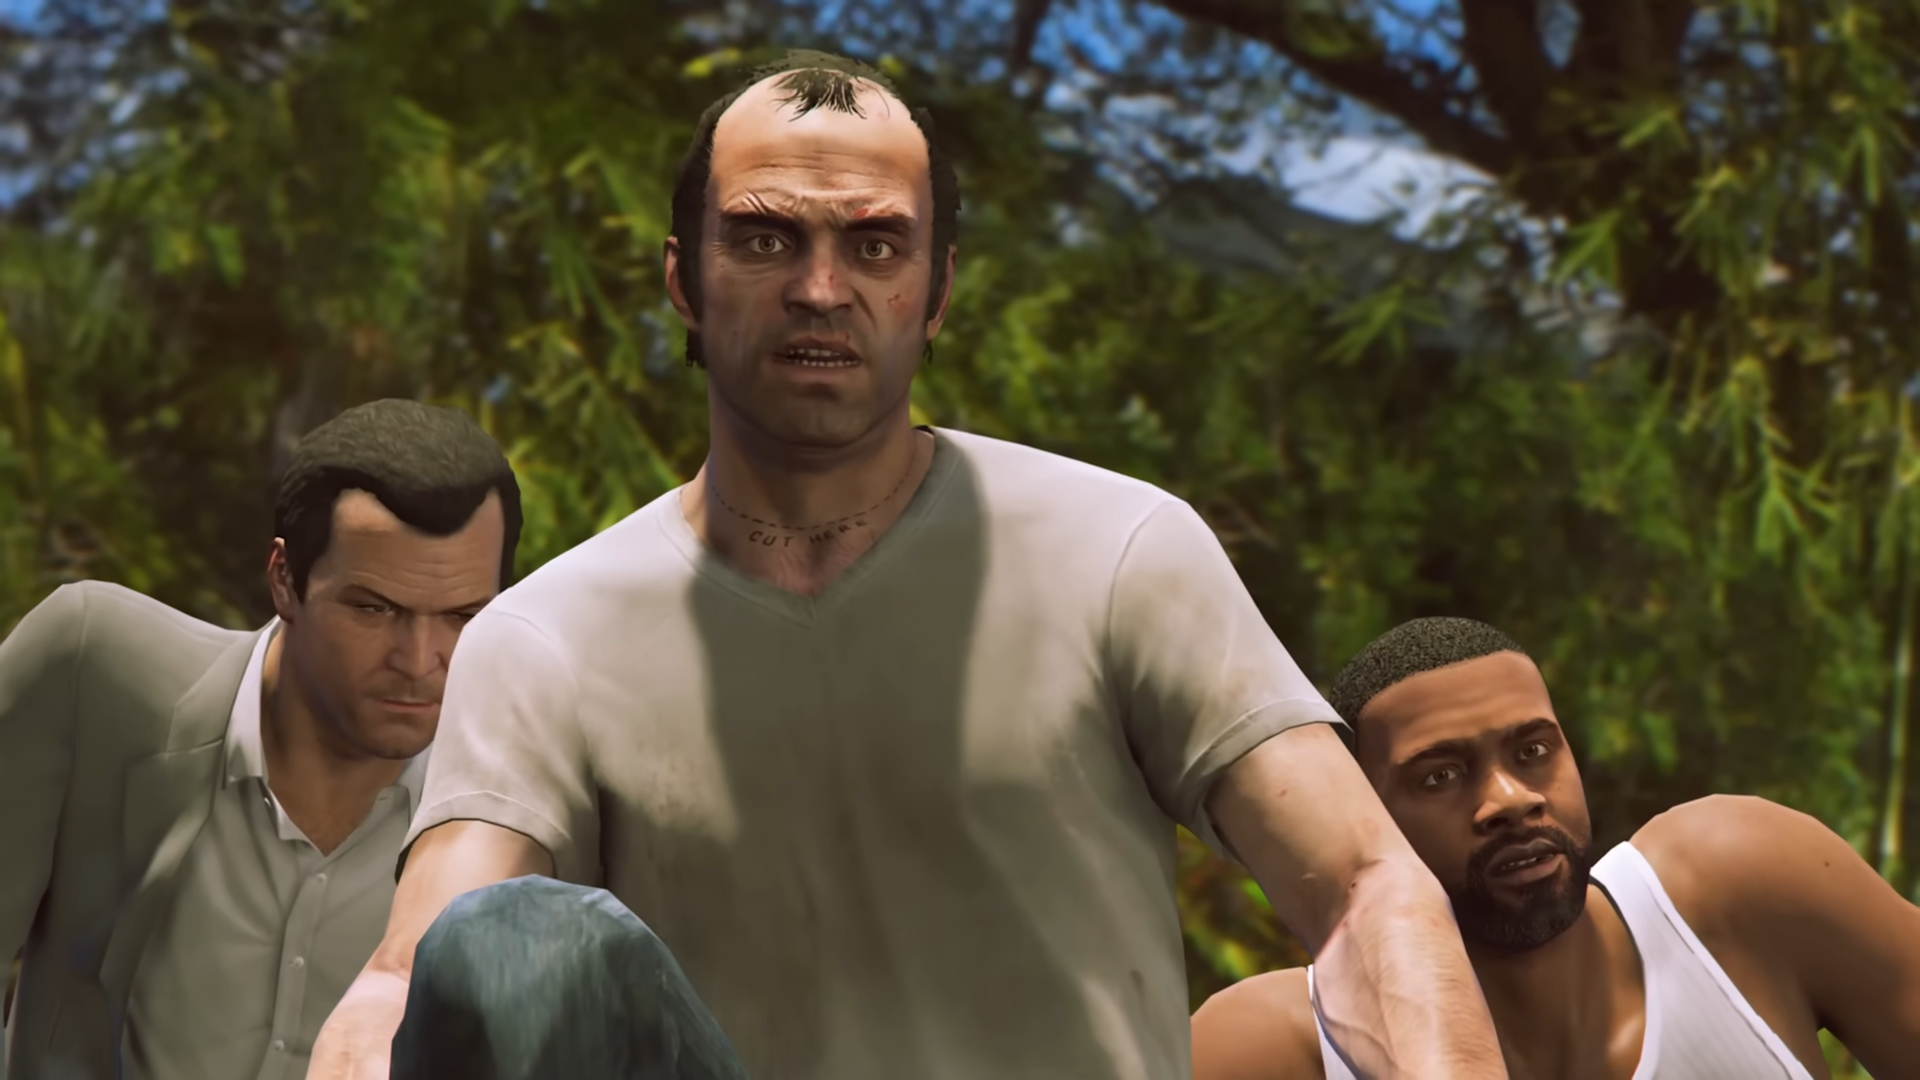 GTA 6 With Franklin, Trevor And Michael: New Fan Trailer Reimagines Iconic Characters